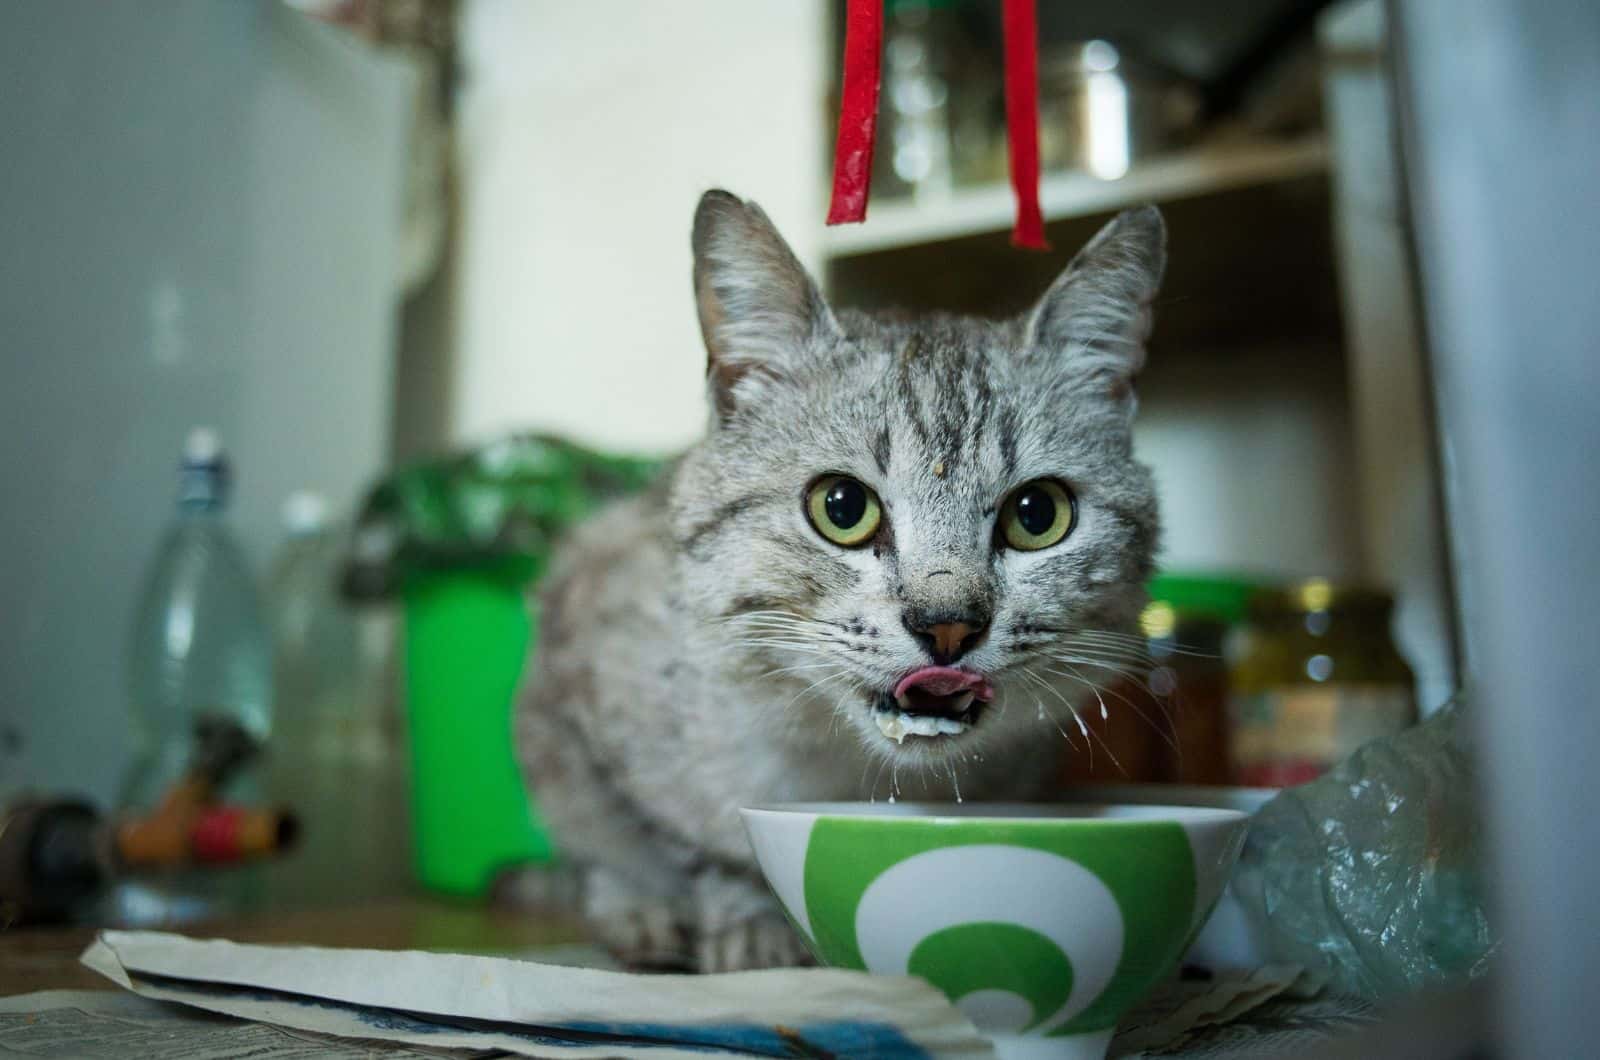 cat looking at camera while drinking from bowl